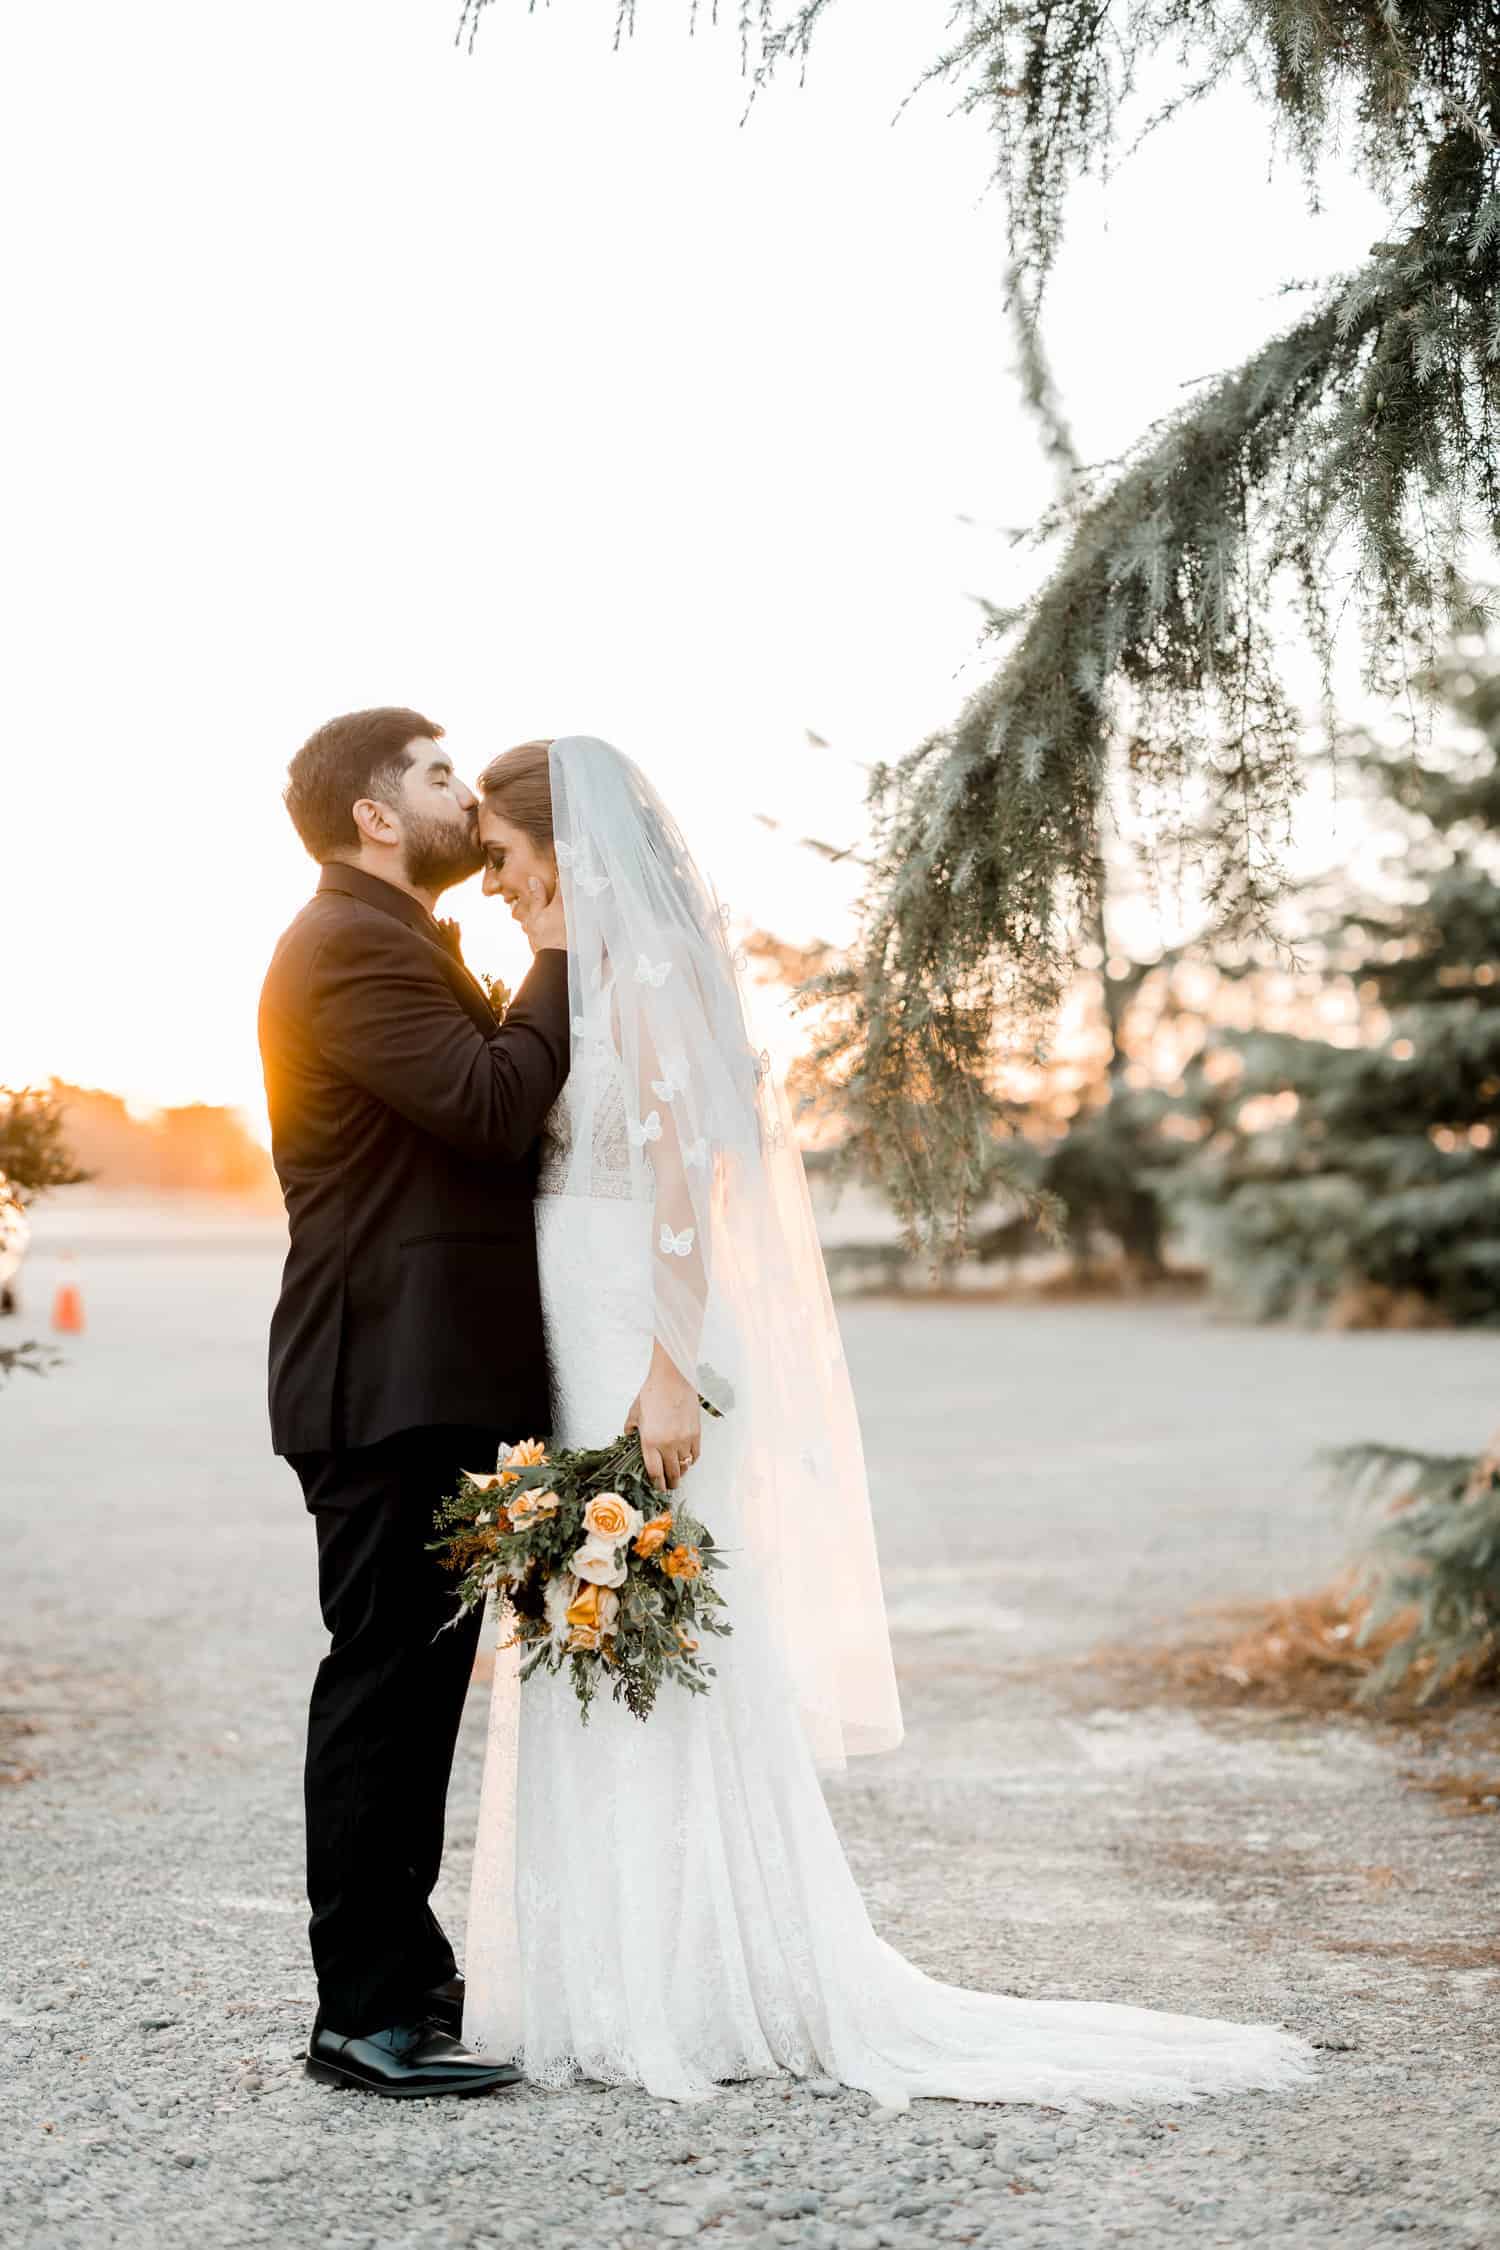 A bride and groom kiss in front of a tree at sunset.